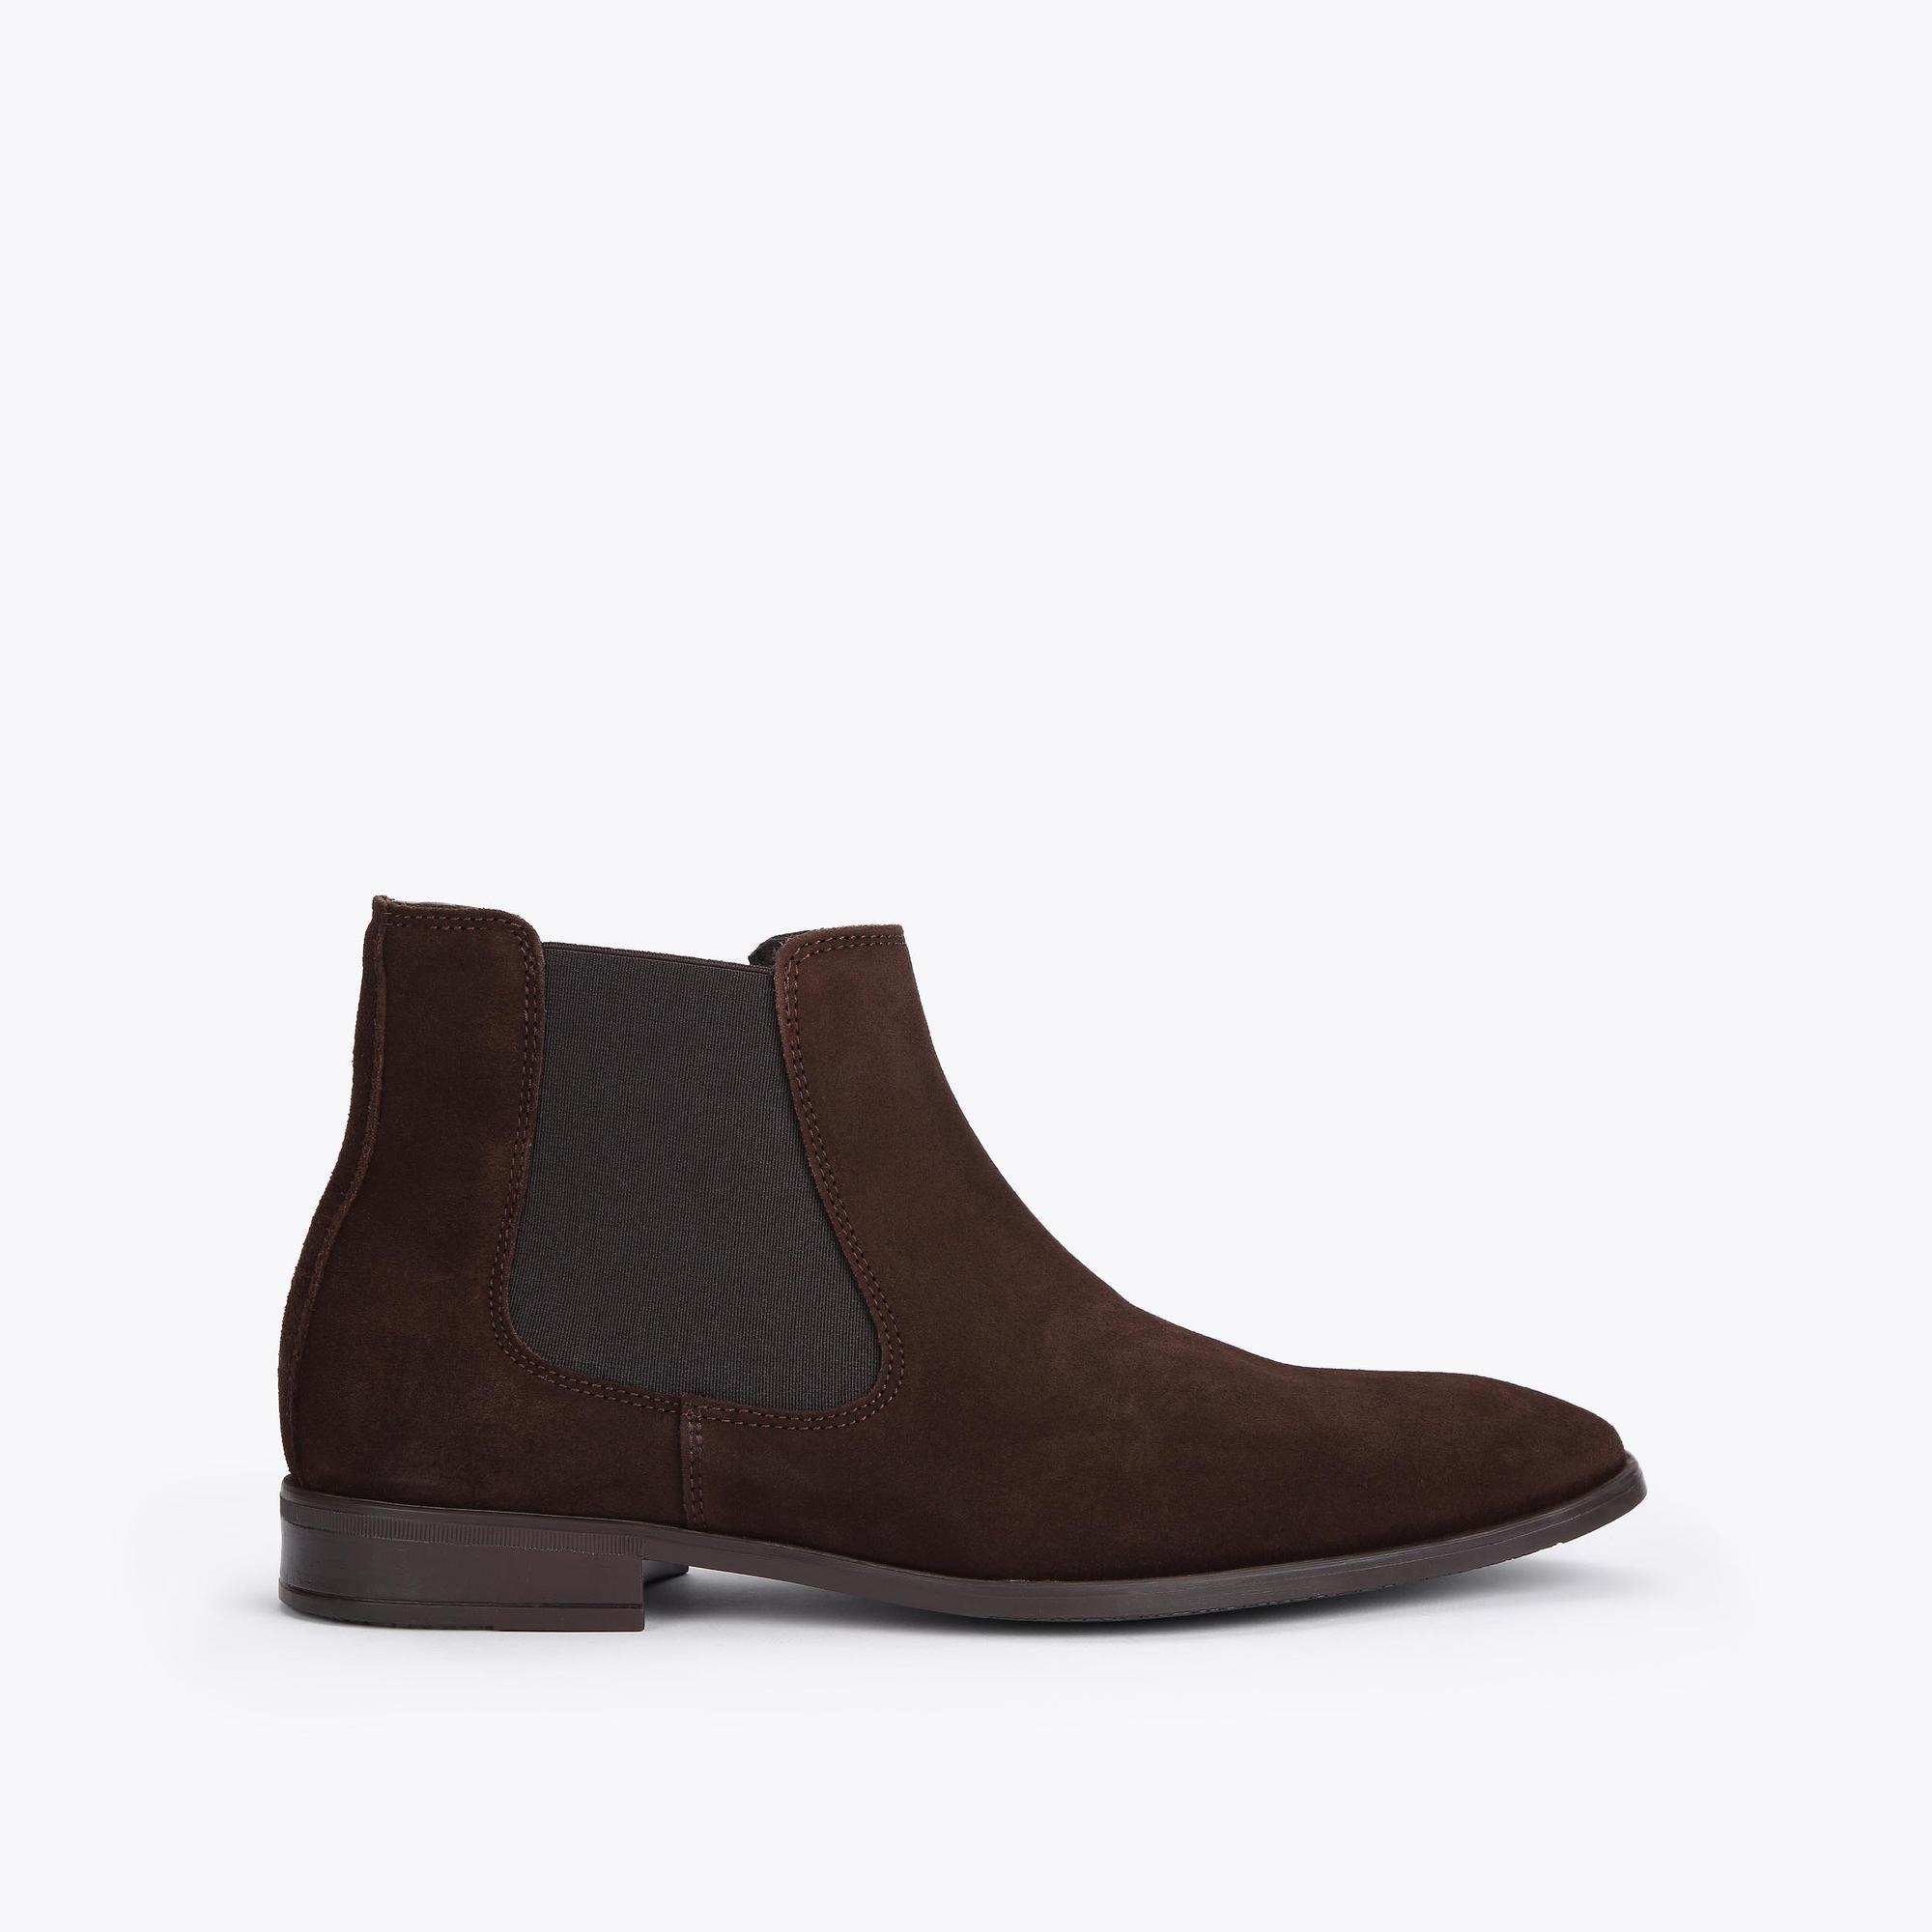 Men's Boots | Suede & Leather Boots